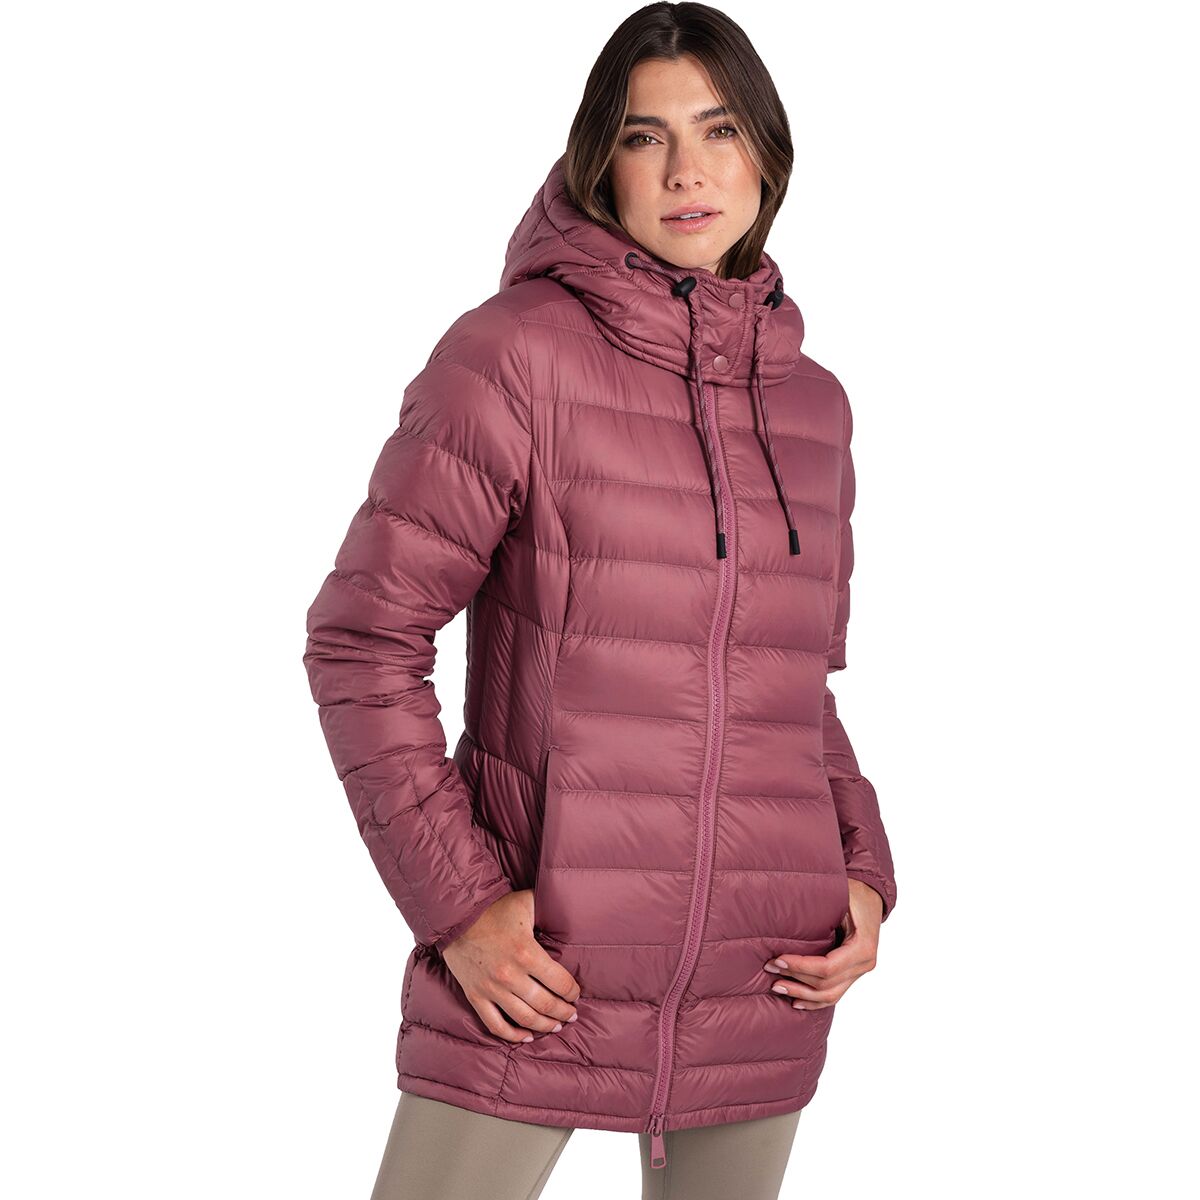 Lole Packable Claudia Down Jacket - Women's - Clothing